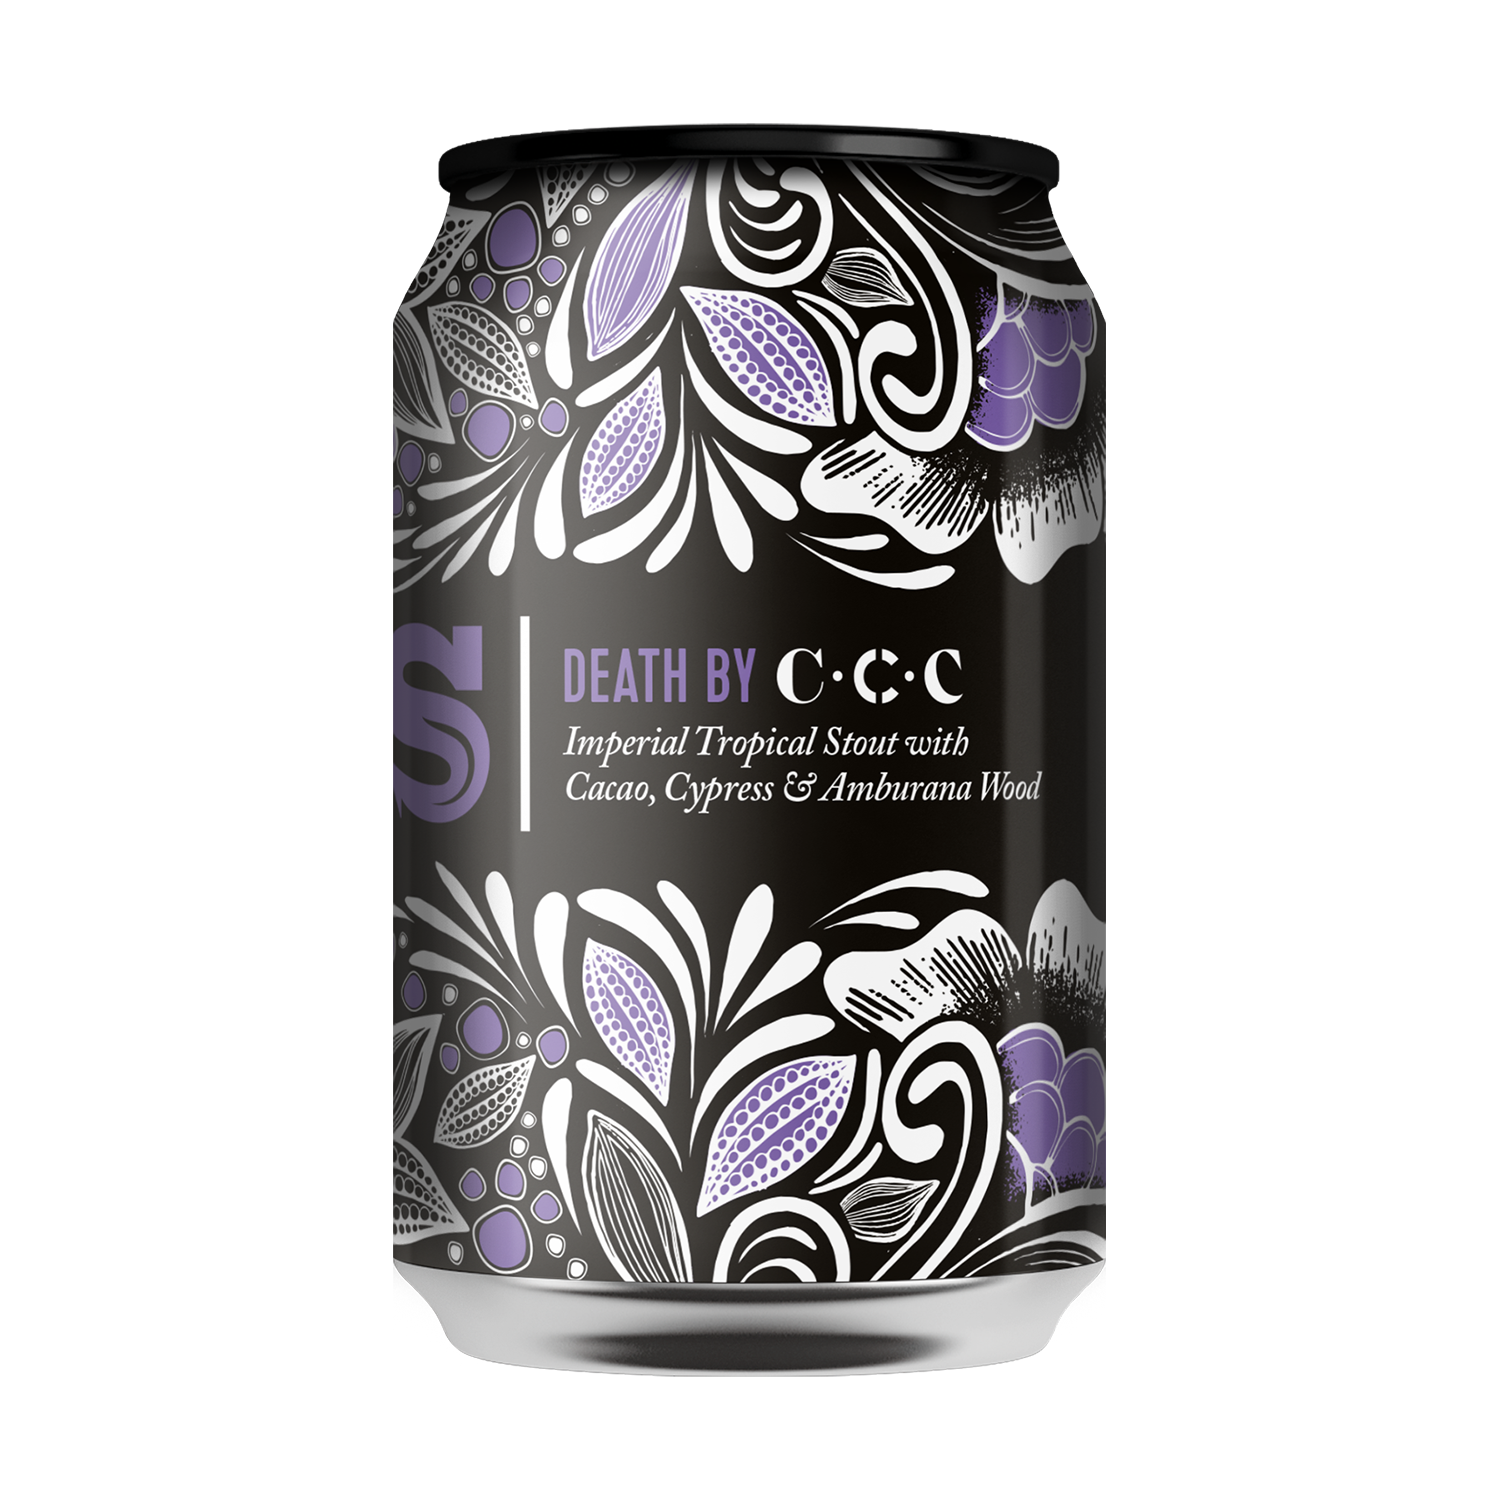 Siren Death By C.C.C Imperial Tropical Stout